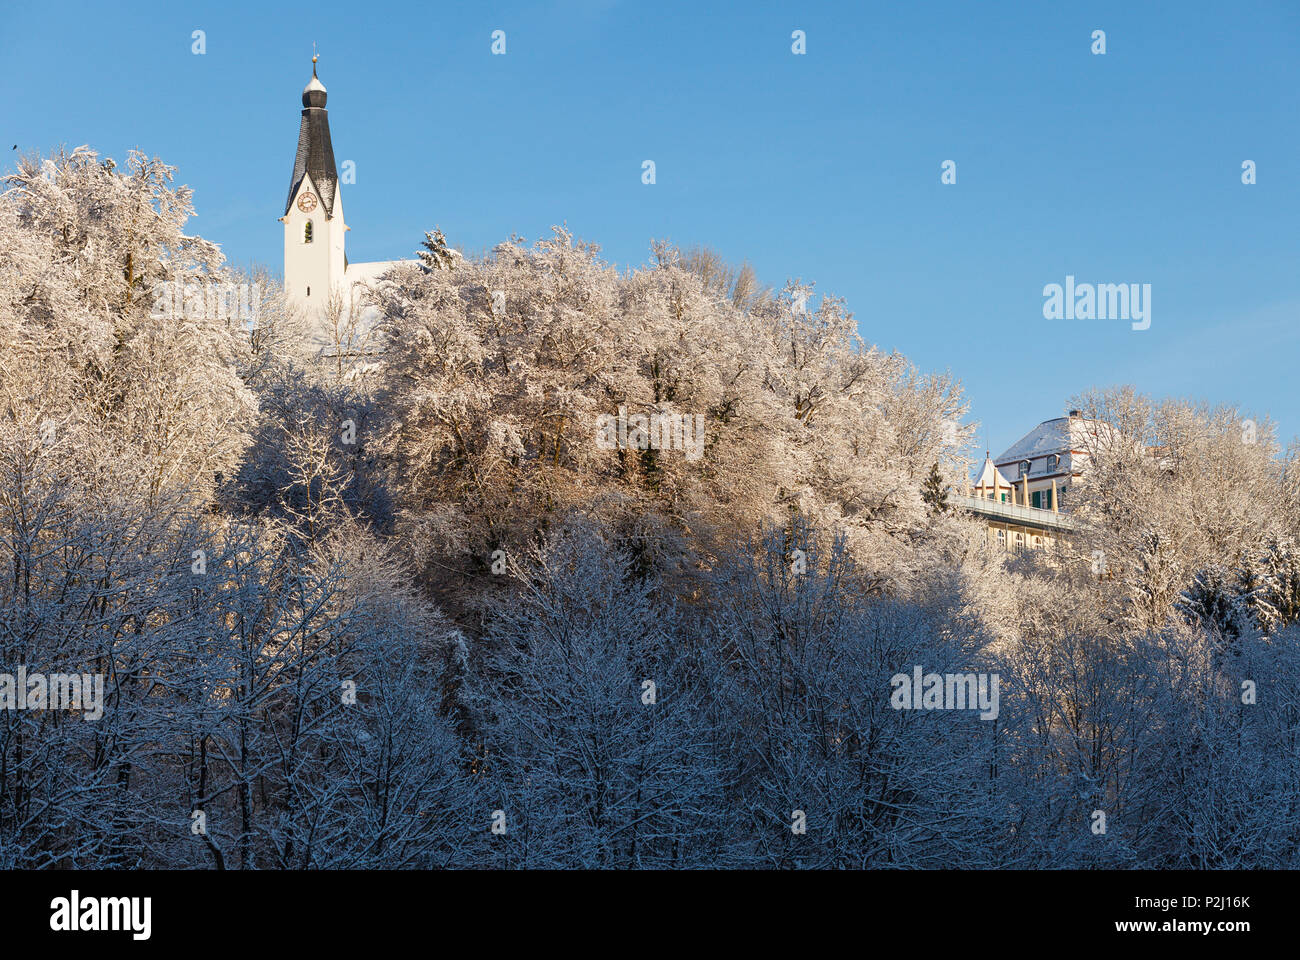 Pullach along the high bank of the Isar river valley and church in winter, Pullach im Isartal, south of Munich, Upper Bavaria, B Stock Photo